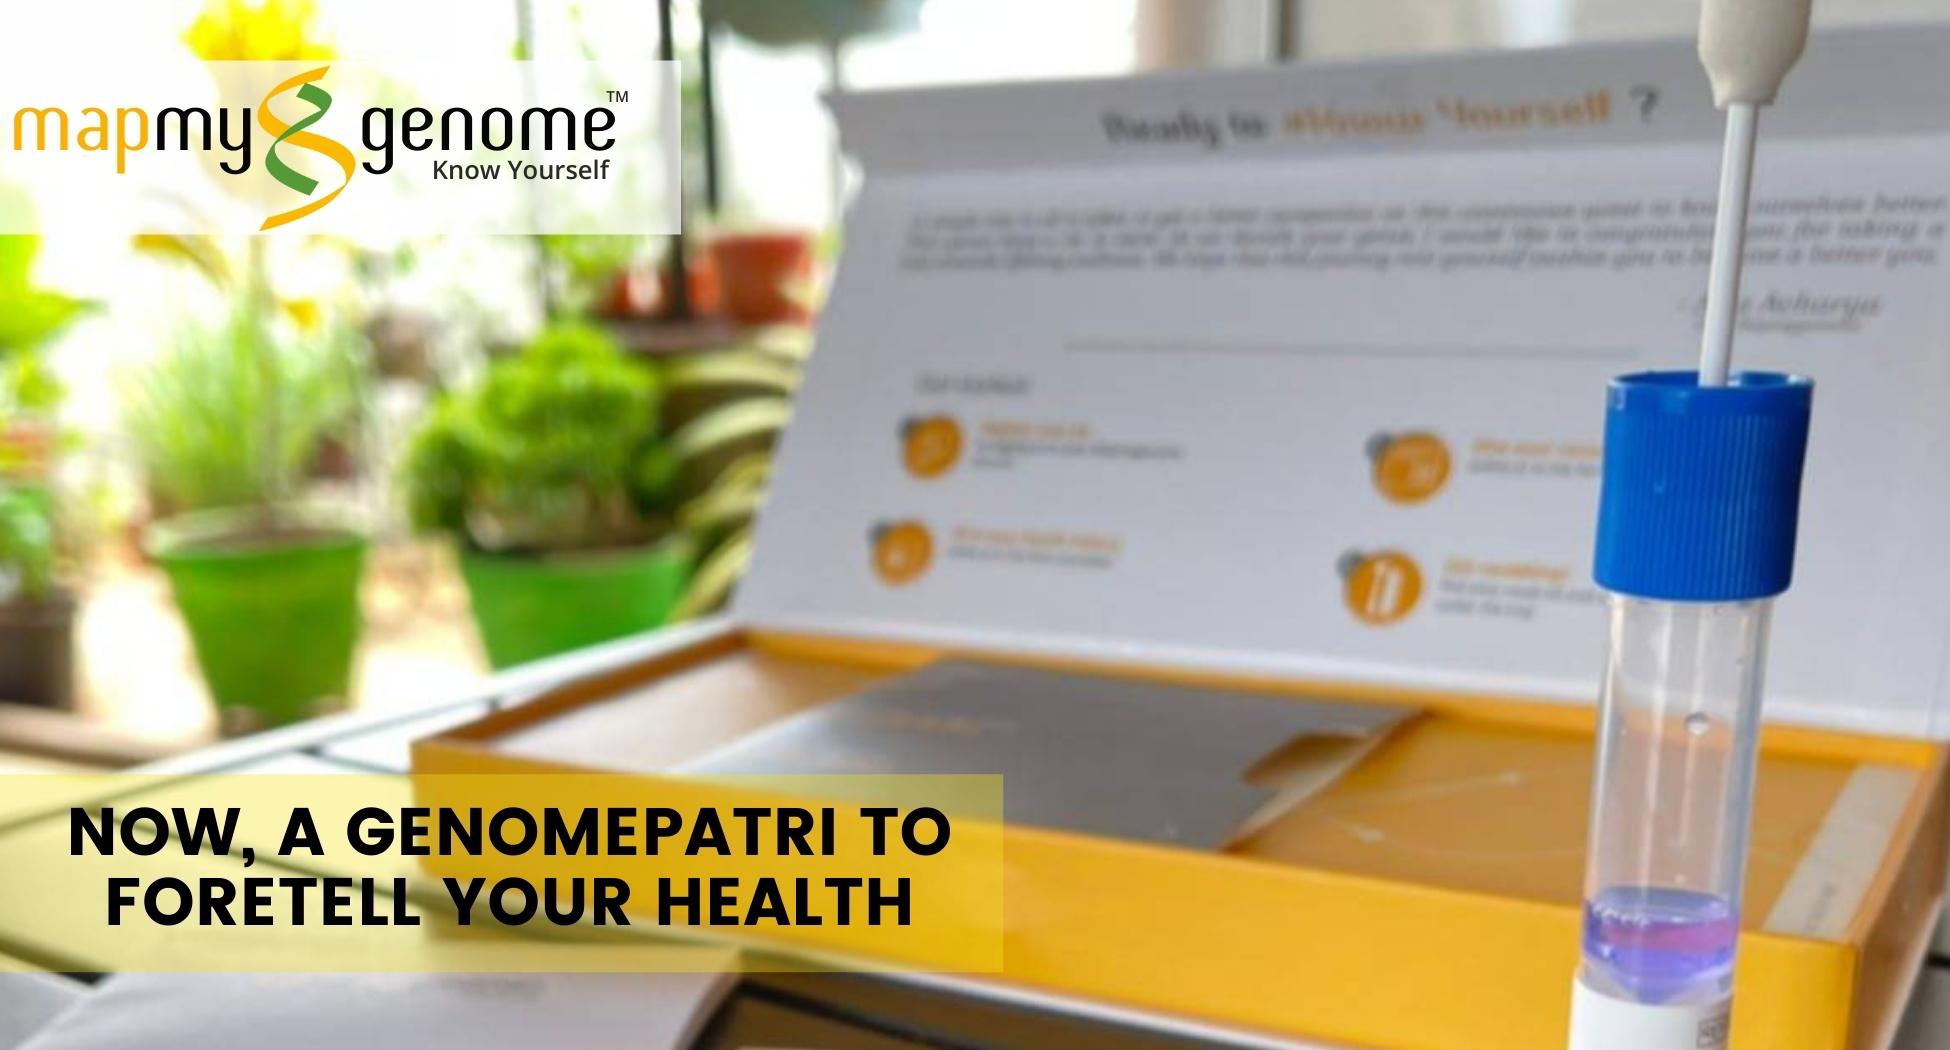 Now, a genomepatra to foretell your health